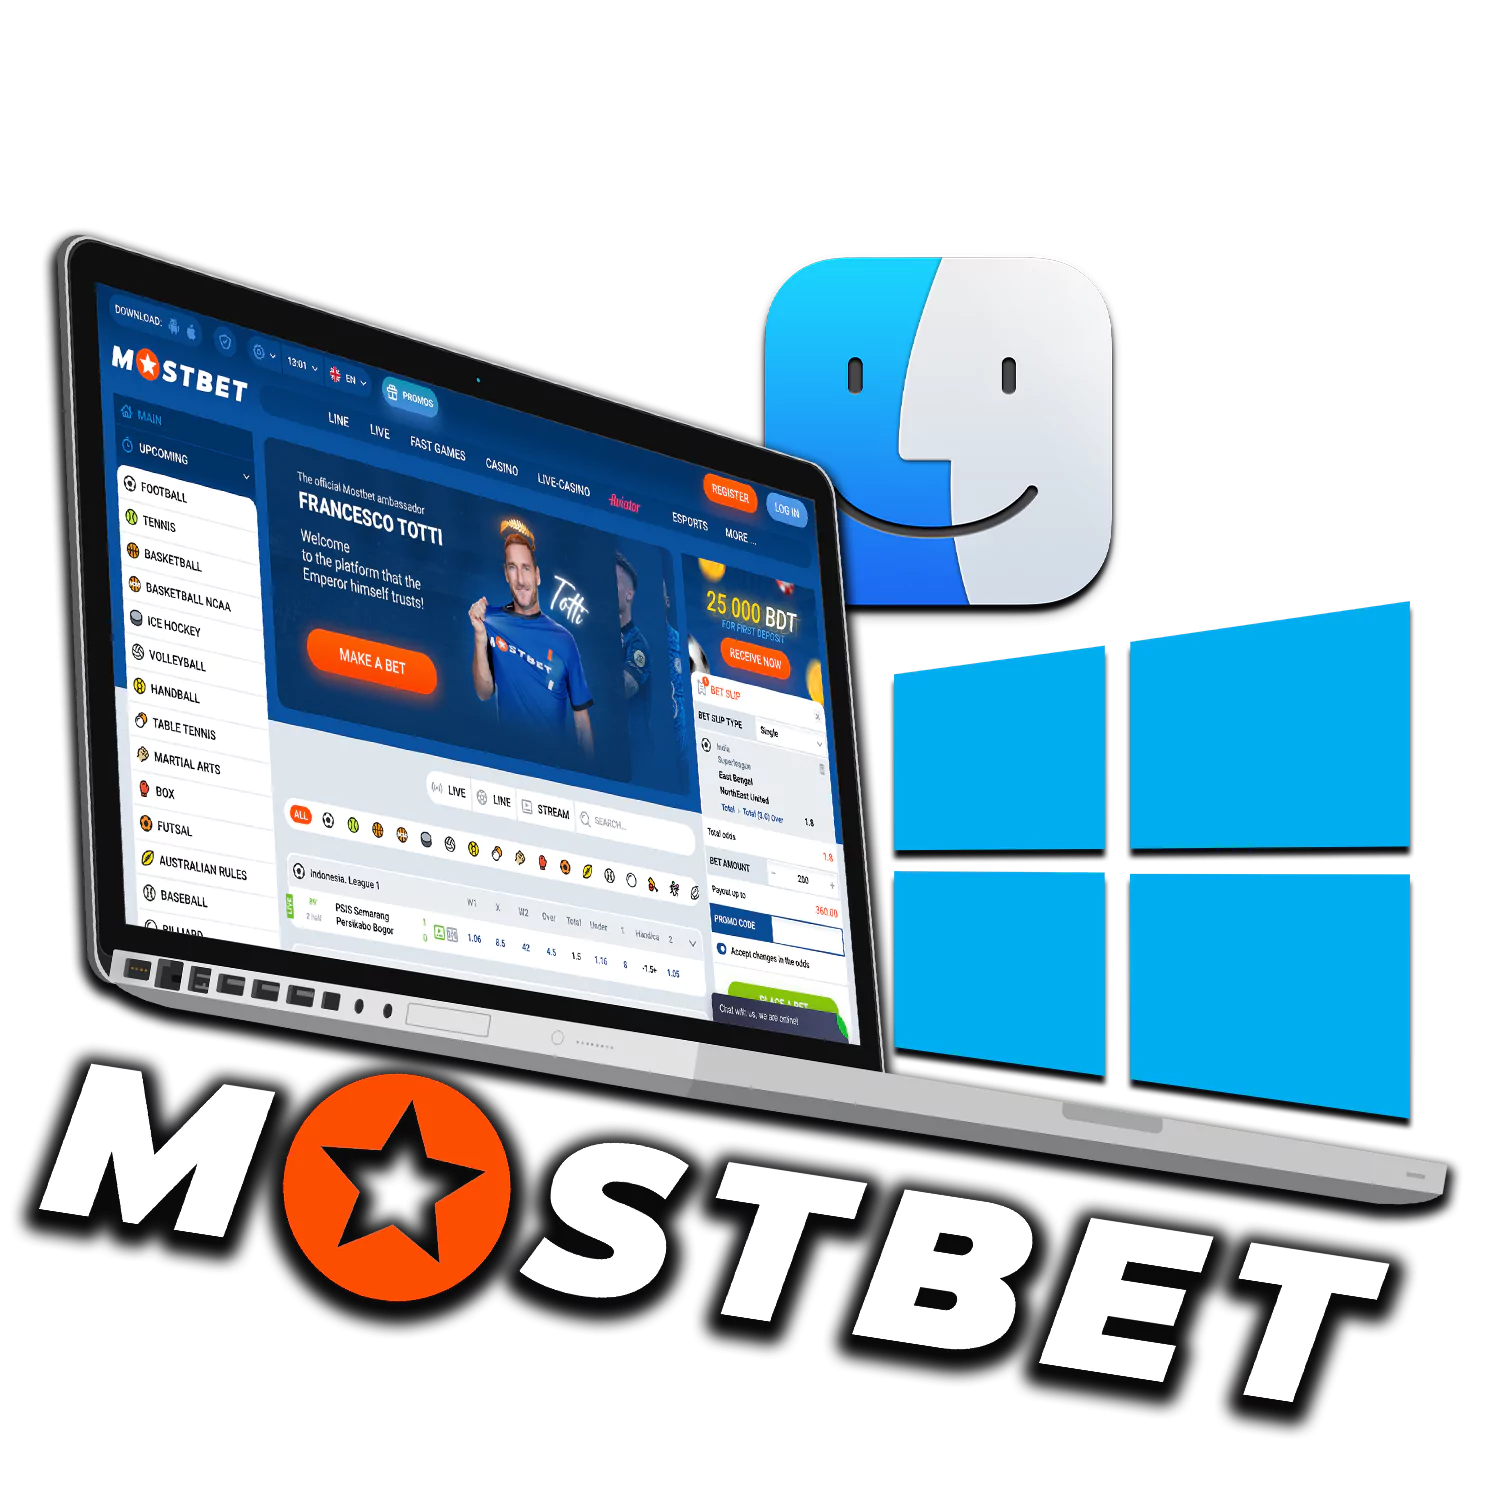 Download PC client of Mostbet Bd for Windows and Mac OS.